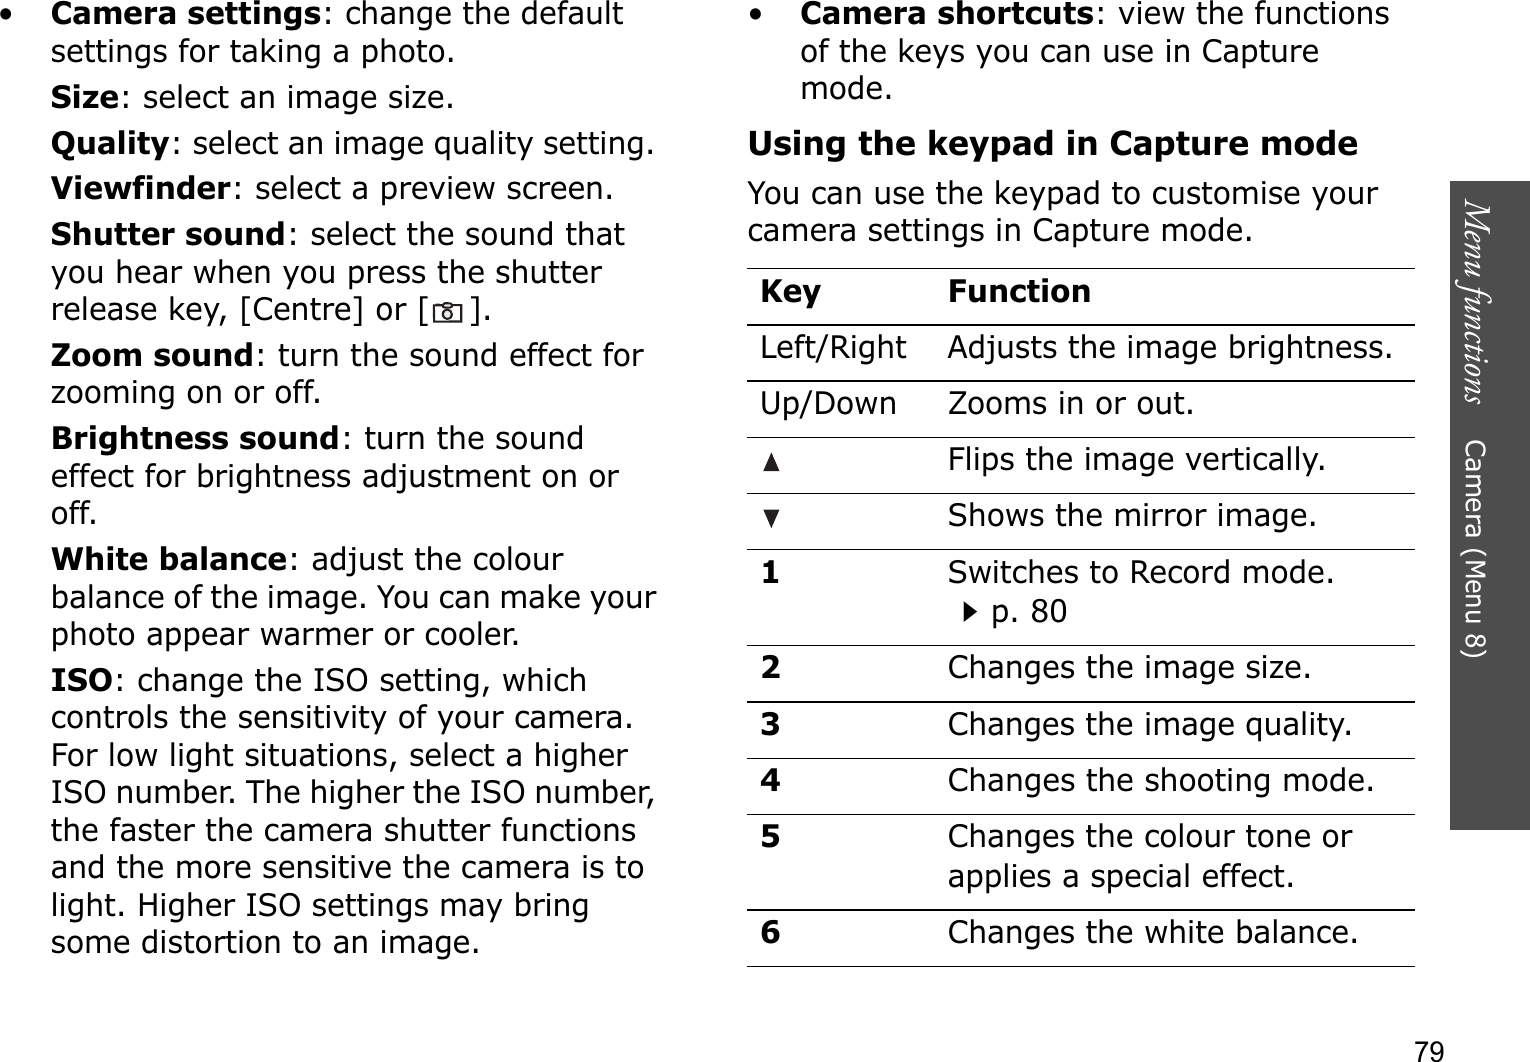 Menu functions    Camera (Menu 8)79•Camera settings: change the default settings for taking a photo.Size: select an image size. Quality: select an image quality setting. Viewfinder: select a preview screen.Shutter sound: select the sound that you hear when you press the shutter release key, [Centre] or [ ].Zoom sound: turn the sound effect for zooming on or off.Brightness sound: turn the sound effect for brightness adjustment on or off.White balance: adjust the colour balance of the image. You can make your photo appear warmer or cooler.ISO: change the ISO setting, which controls the sensitivity of your camera. For low light situations, select a higher ISO number. The higher the ISO number, the faster the camera shutter functions and the more sensitive the camera is to light. Higher ISO settings may bring some distortion to an image.•Camera shortcuts: view the functions of the keys you can use in Capture mode.Using the keypad in Capture modeYou can use the keypad to customise your camera settings in Capture mode.Key FunctionLeft/Right Adjusts the image brightness.Up/Down Zooms in or out.Flips the image vertically.Shows the mirror image.1Switches to Record mode.p. 802Changes the image size. 3Changes the image quality.4Changes the shooting mode.5Changes the colour tone or applies a special effect.6Changes the white balance.